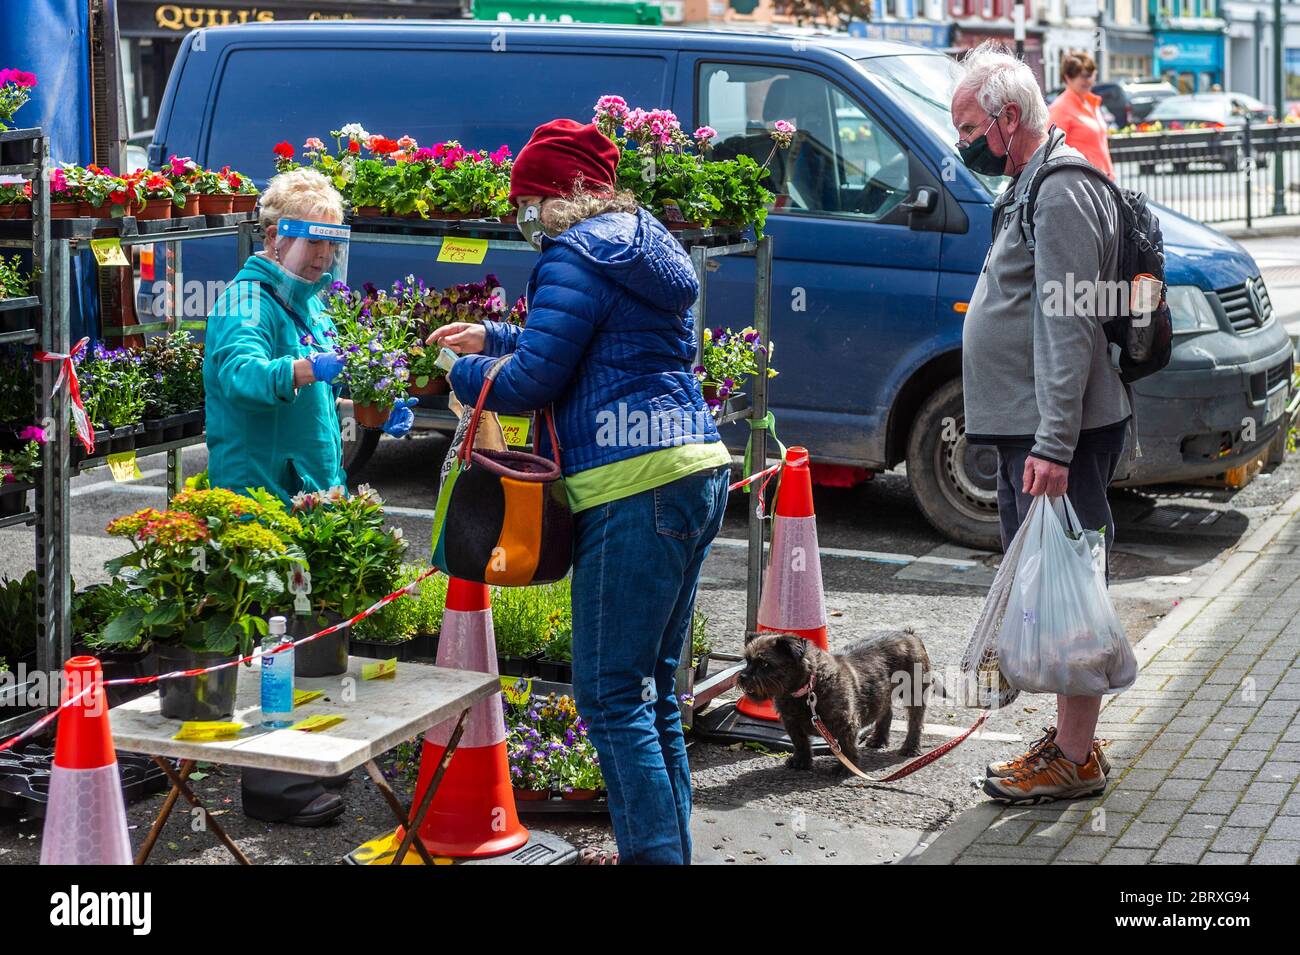 Bantry, West Cork, Ireland. 22nd May, 2020. Despite gale force winds, Bantry Market re-opened today with big crowds after a 2 month closure due to the Covid-19 pandemic. Credit: AG News/Alamy Live News Stock Photo